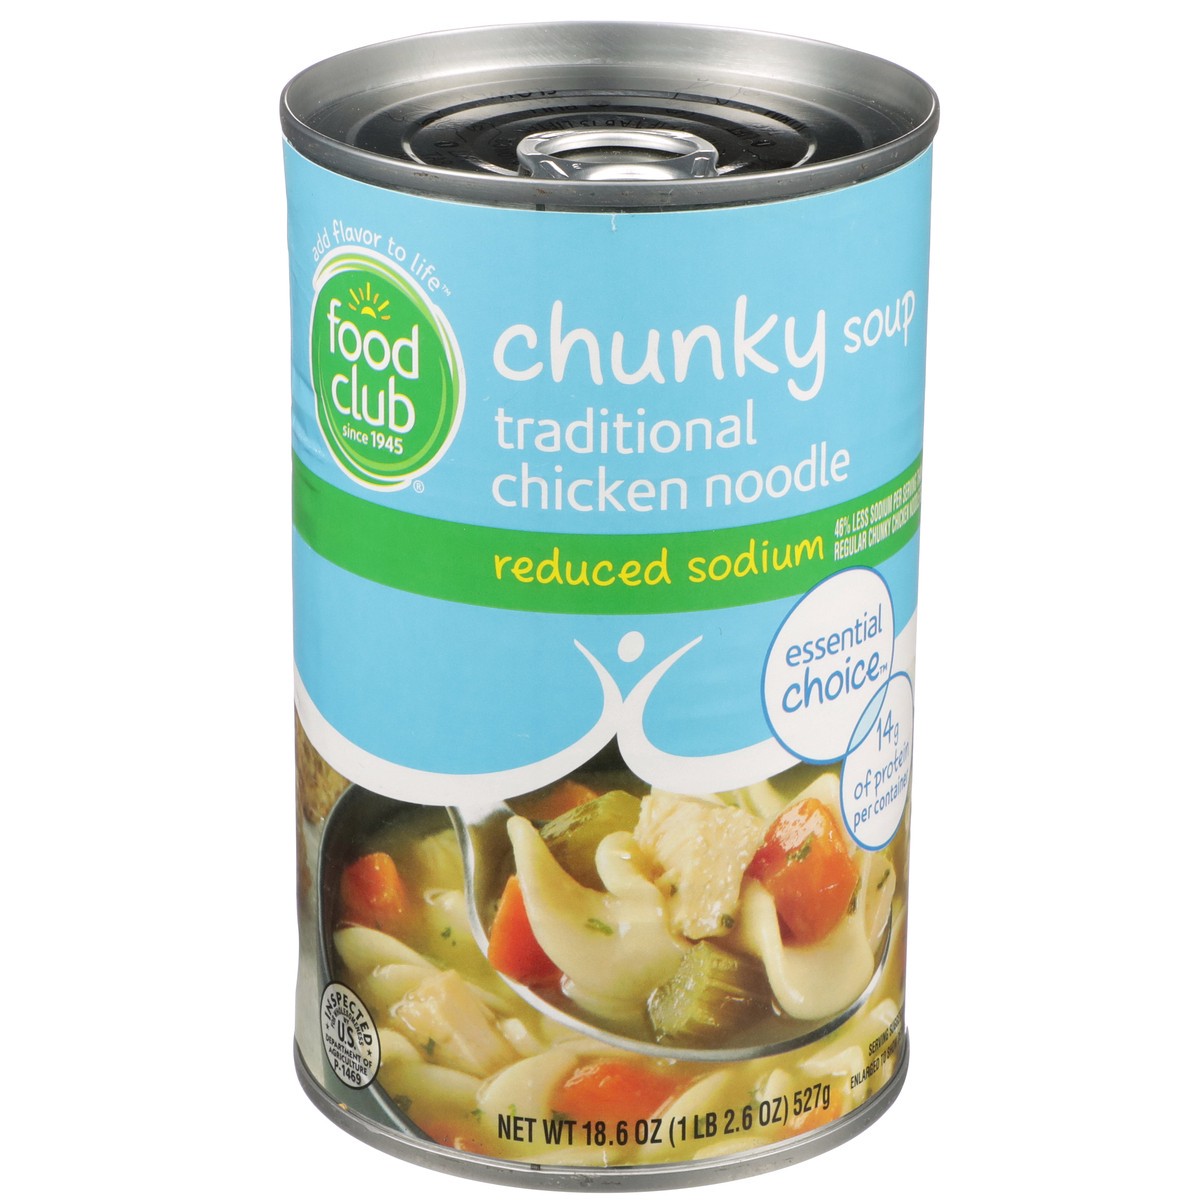 slide 1 of 11, Food Club Reduced Sodium Traditional Chicken Noodle Chunky Soup, 18.6 oz